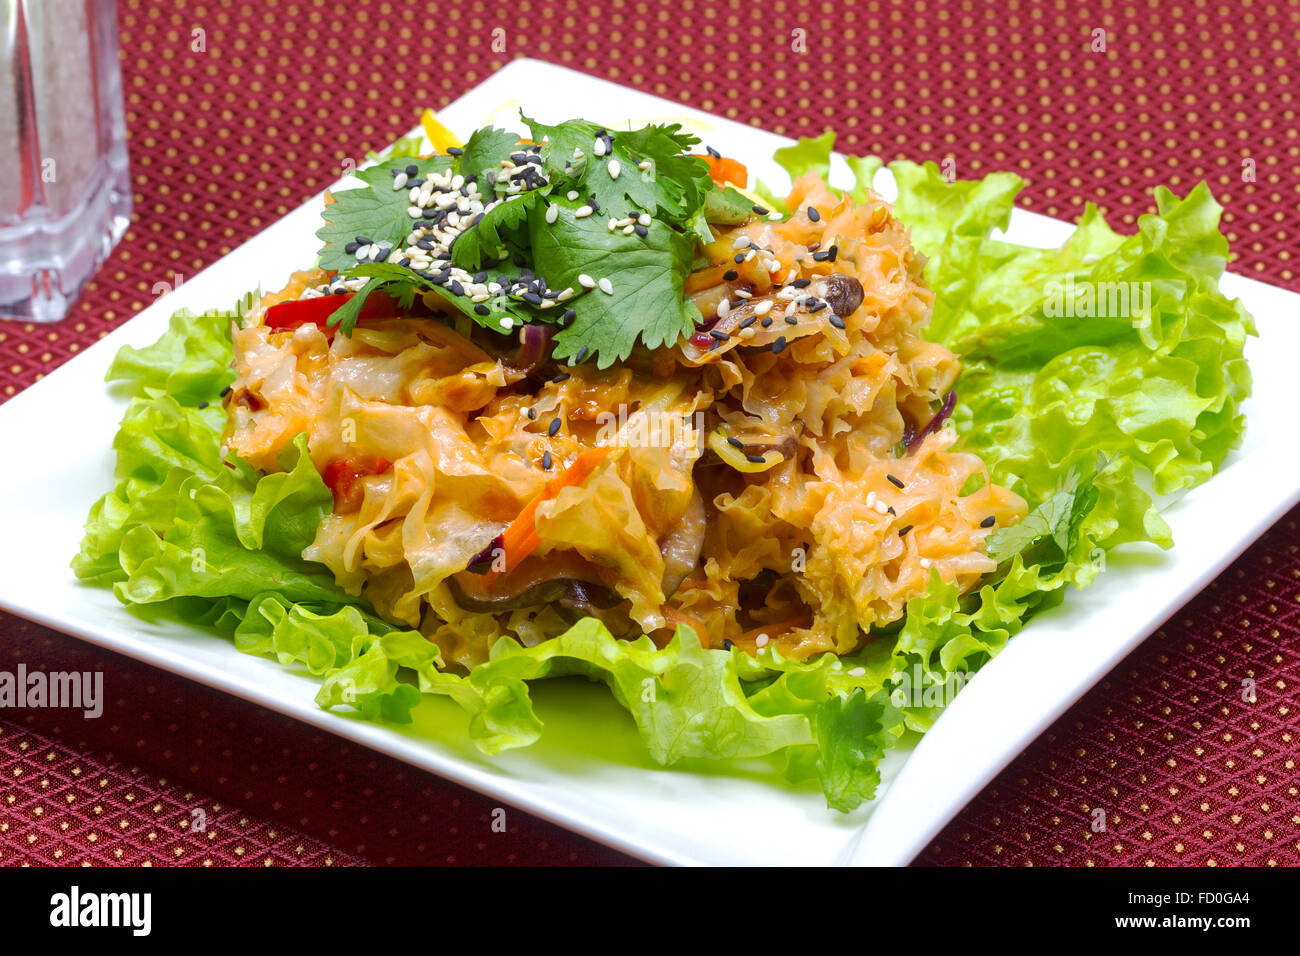 Coleslaw, green leaf lettuce and sesame seeds, selective focus. Table setting. Creative cuisine. Stock Photo